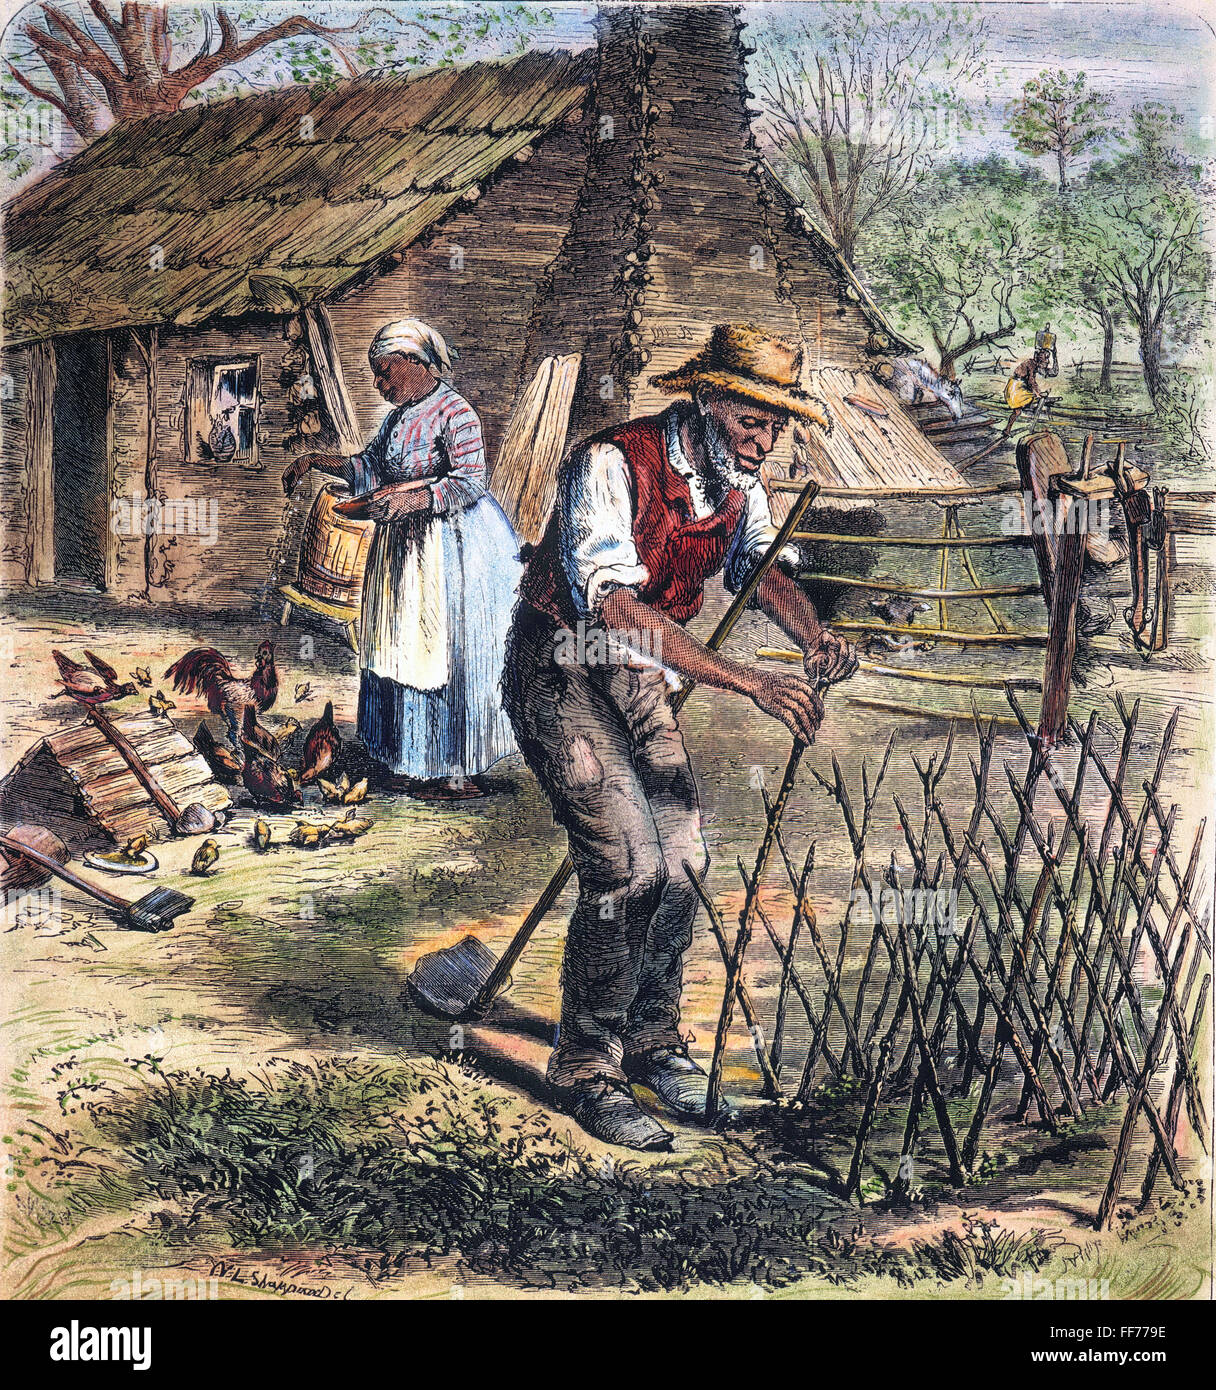 BLACK SHARECROPPERS, 1870. /nBlack sharecroppers in the American South: colored engraving, 1870. Stock Photo